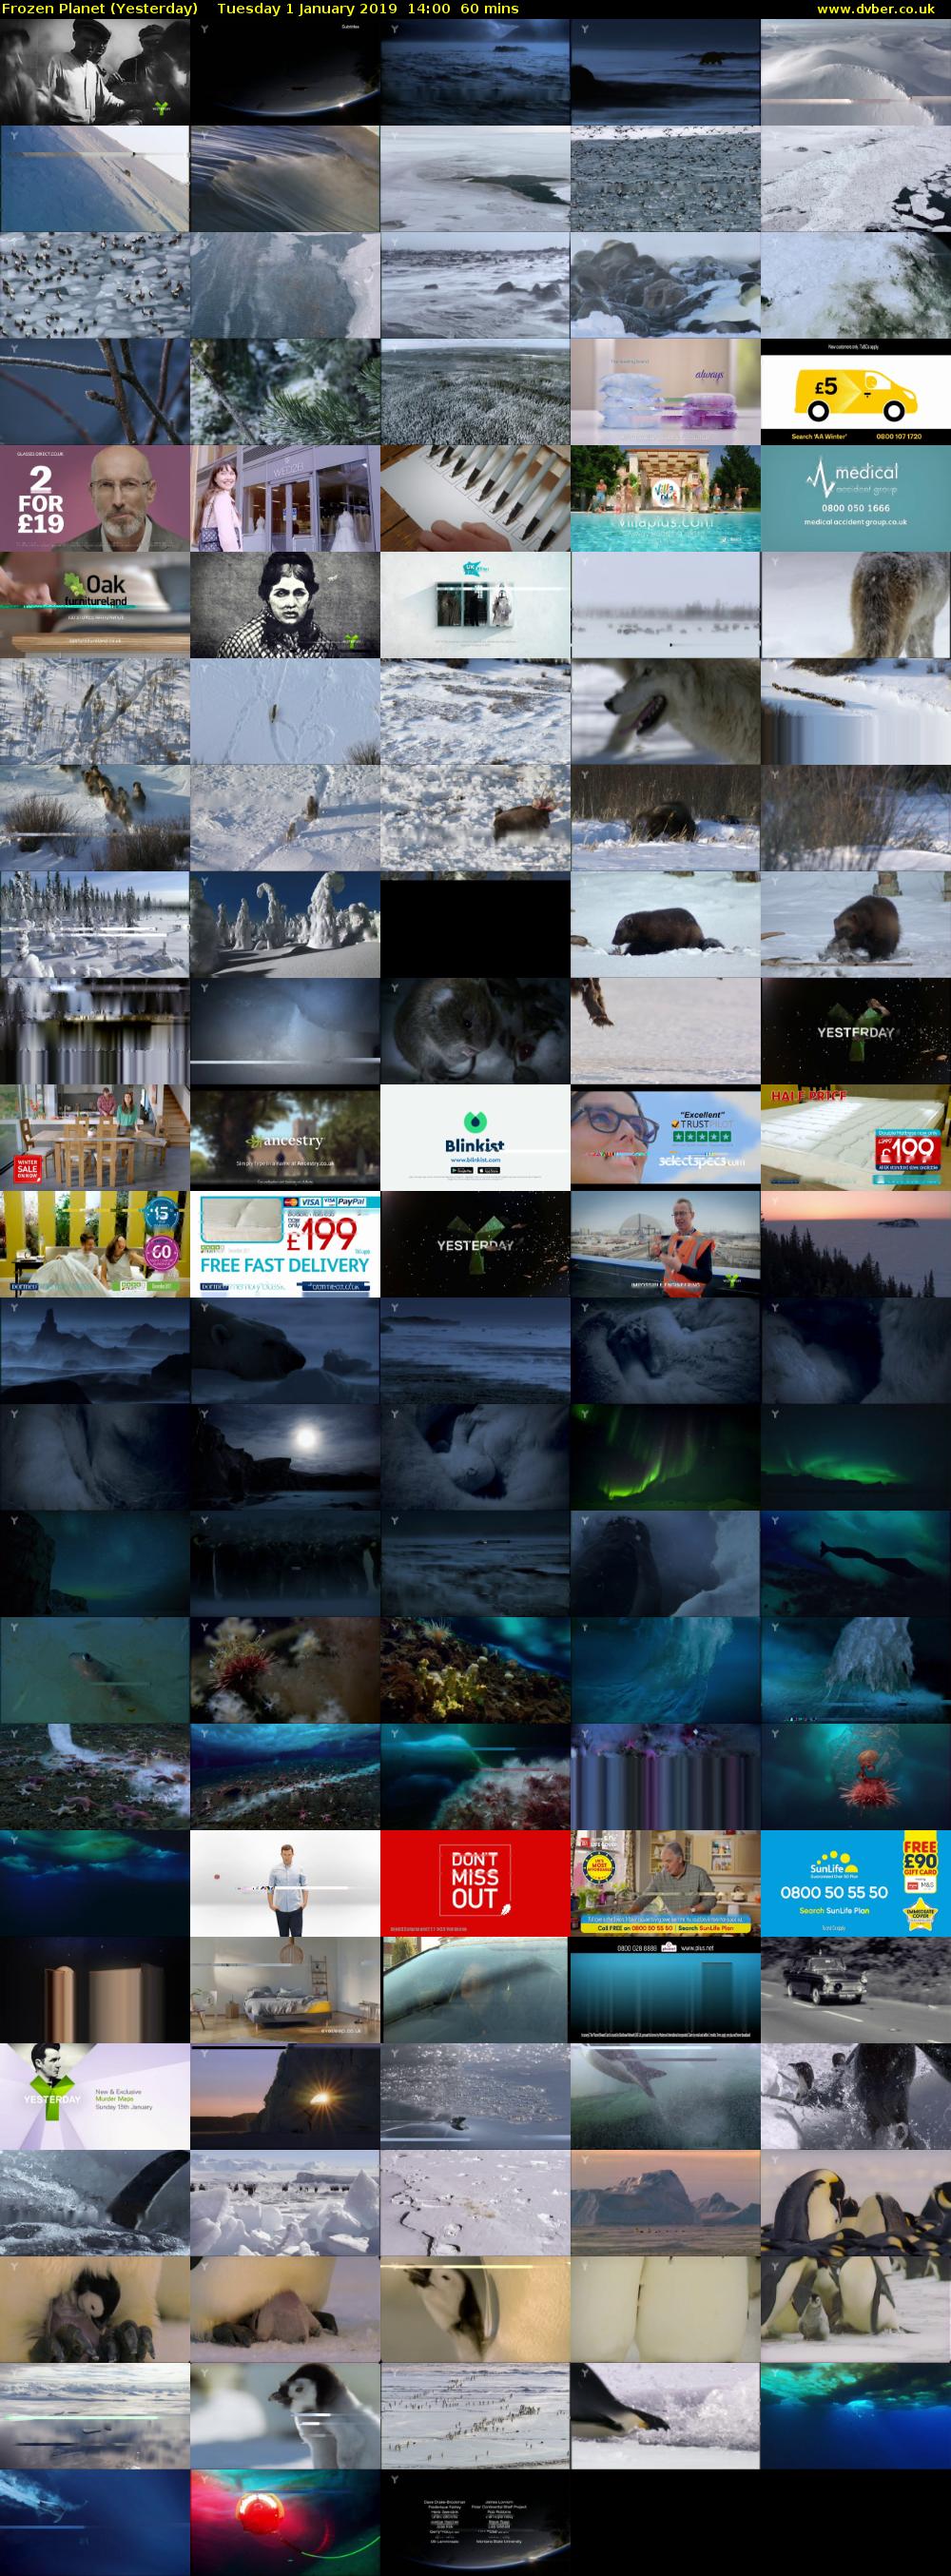 Frozen Planet (Yesterday) Tuesday 1 January 2019 14:00 - 15:00